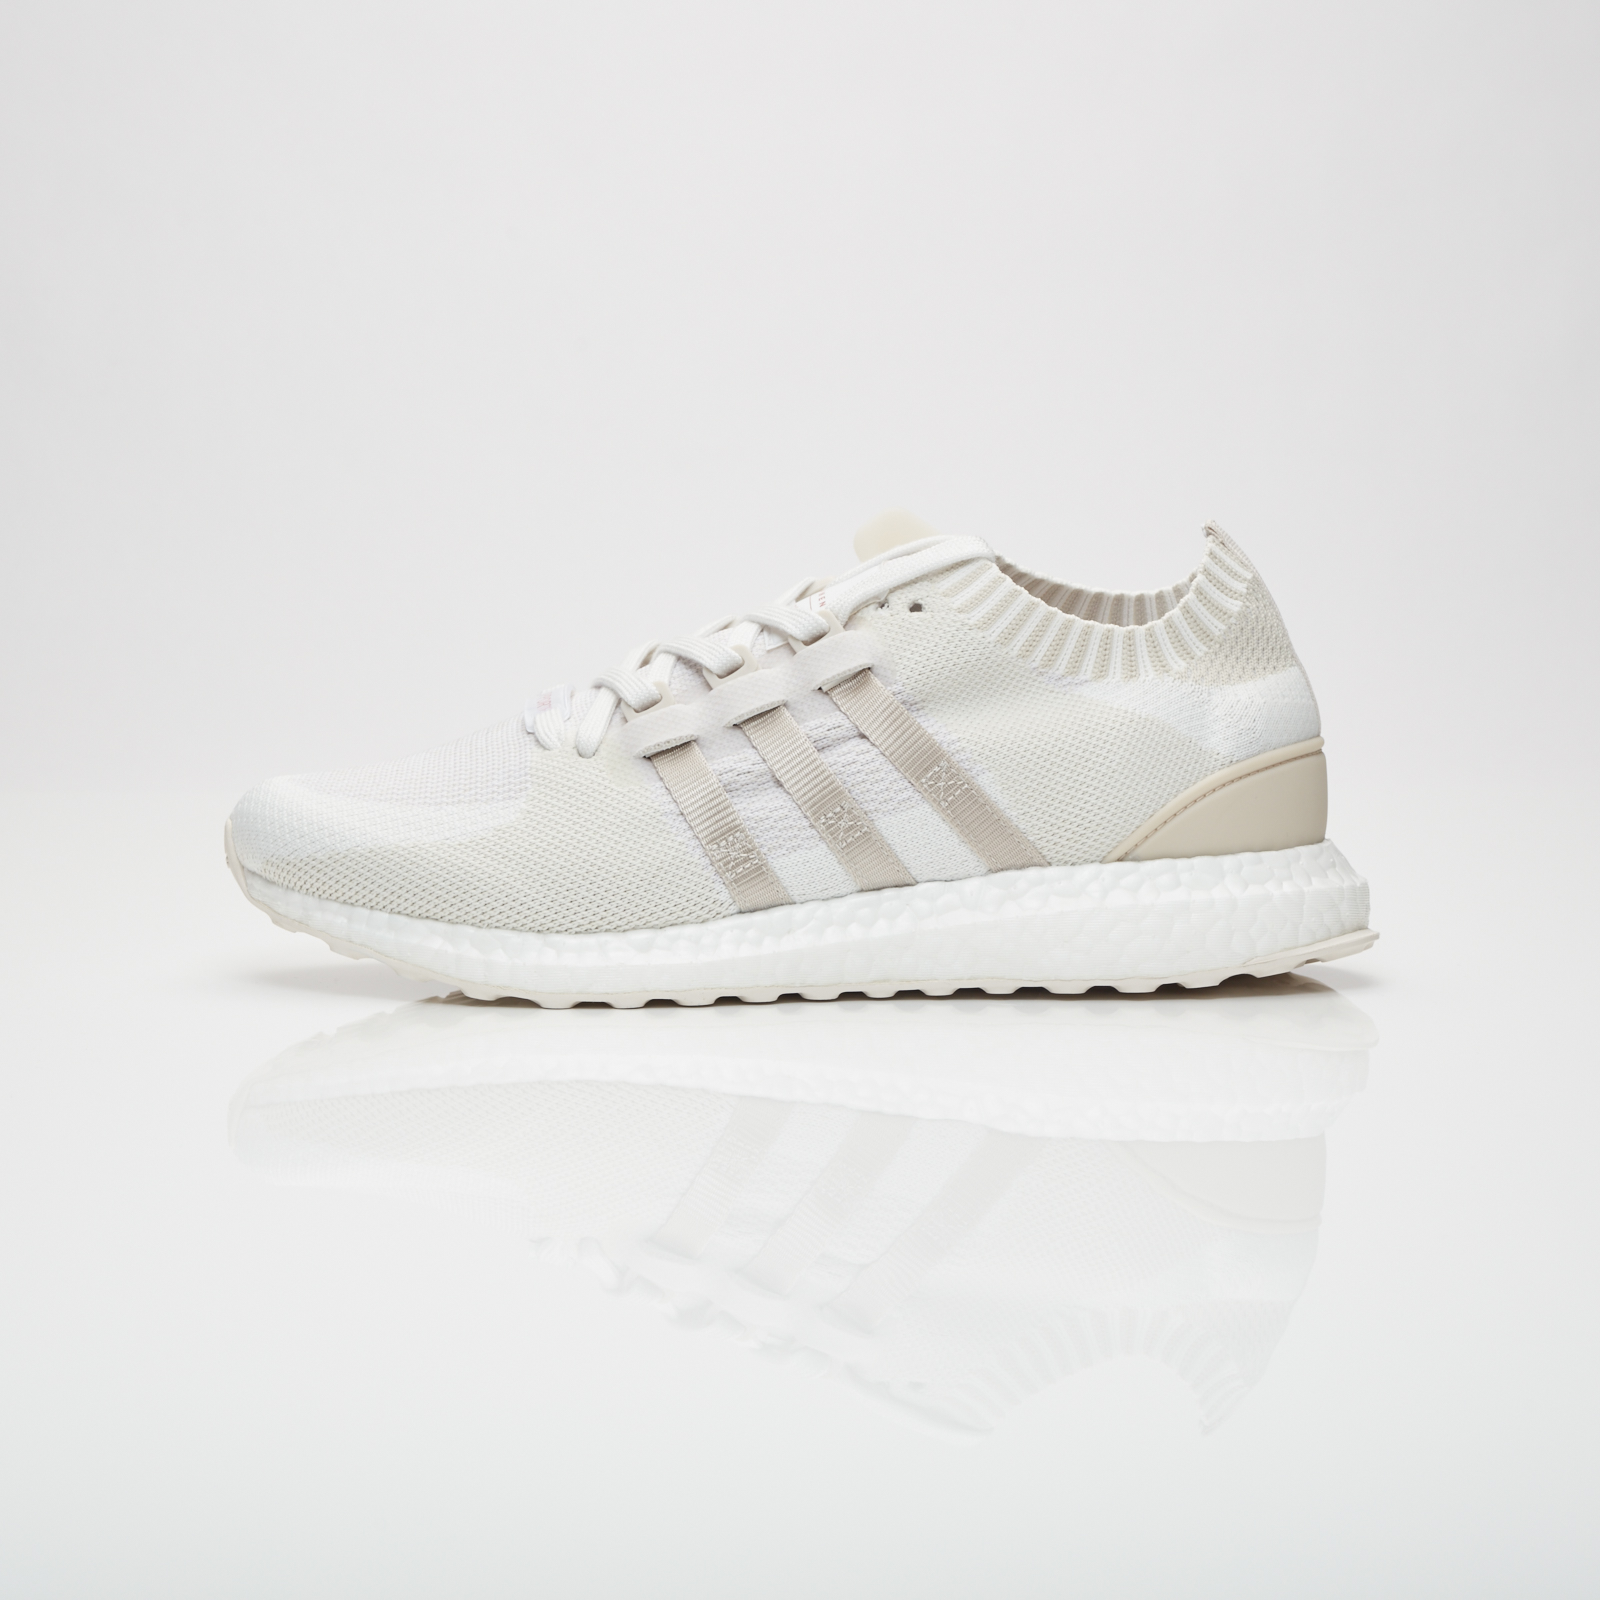 adidas-eqt-support-ultra-boost-pk-white-eqt-material-pack-2